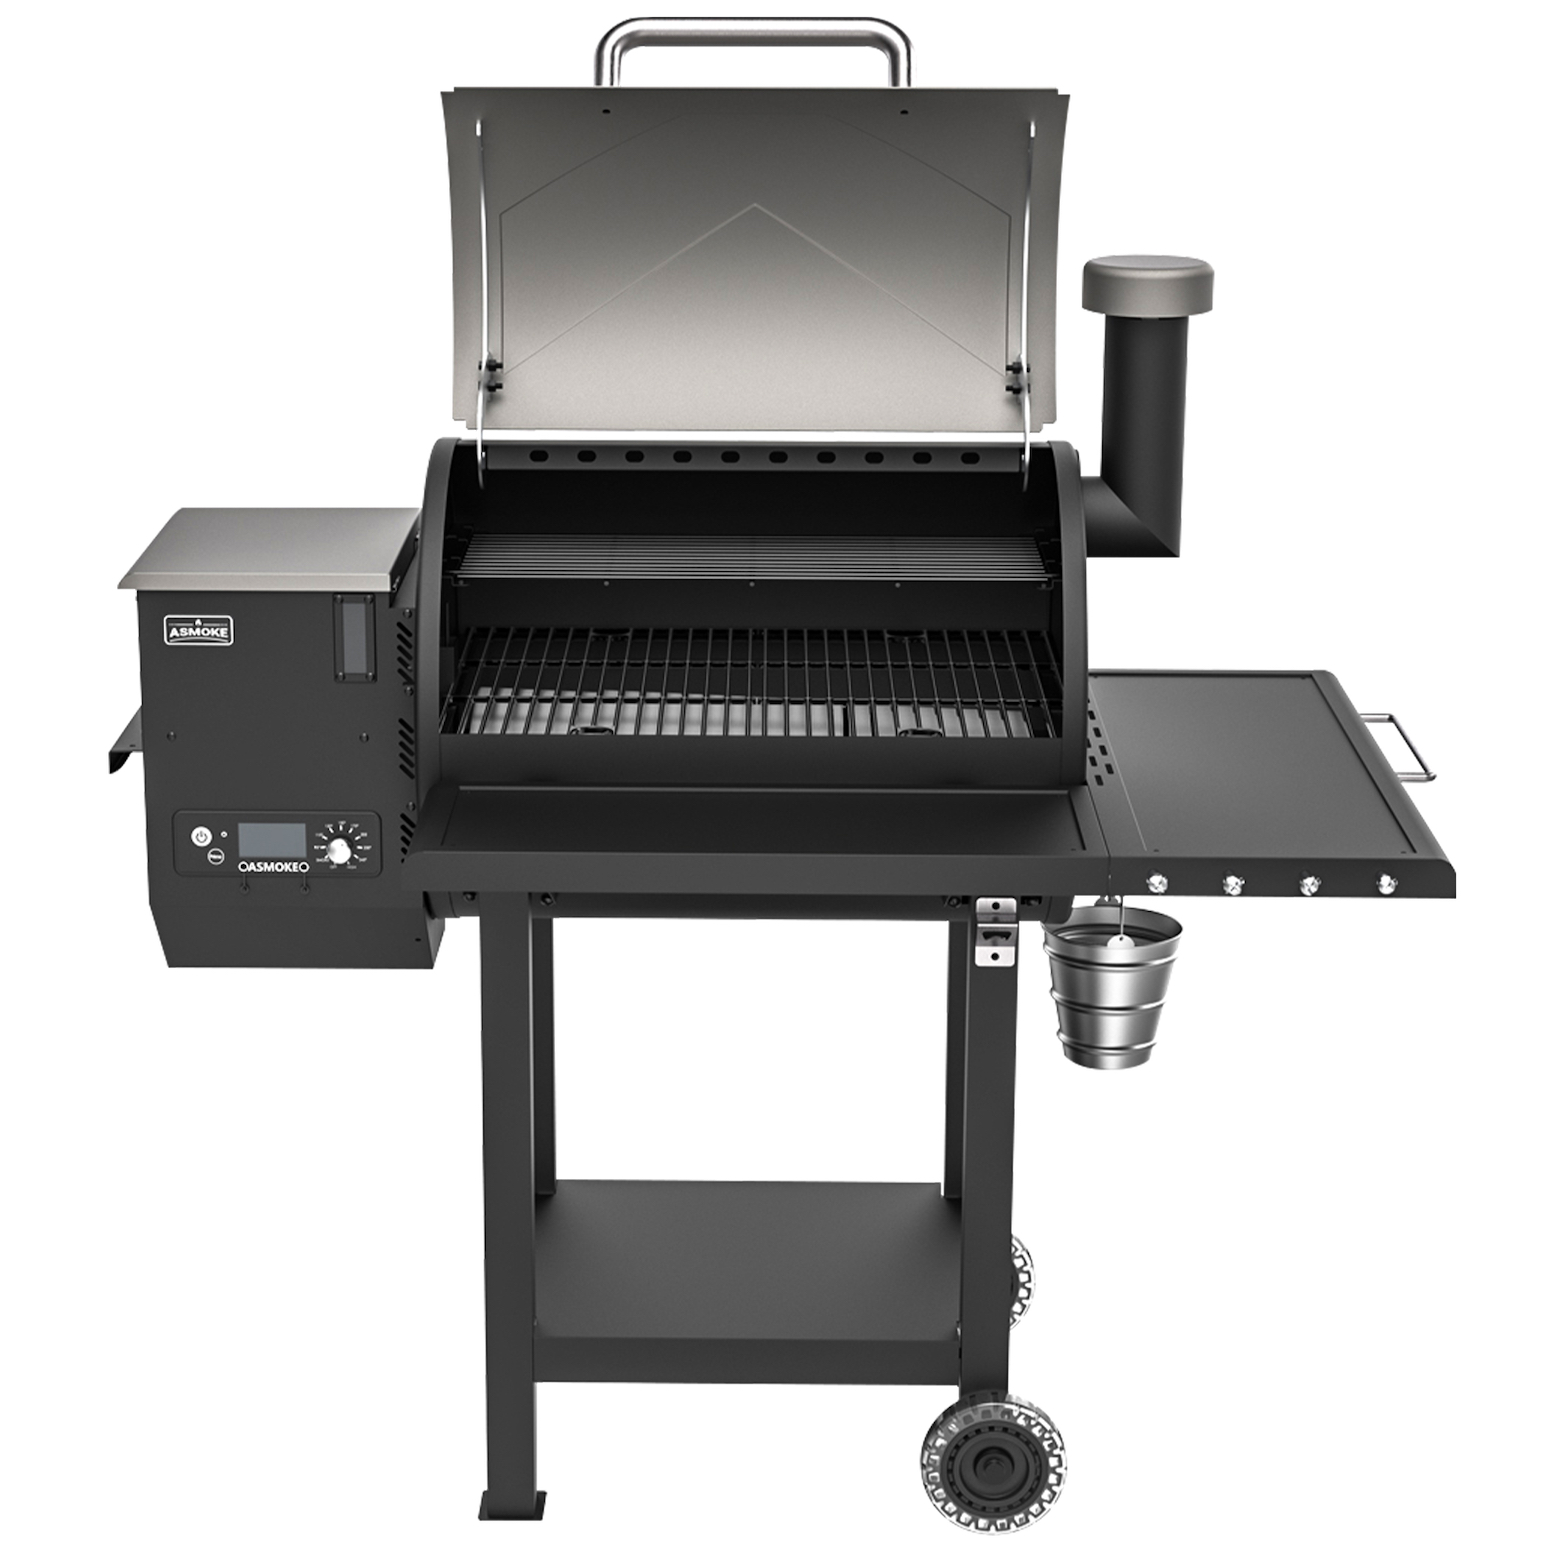 ASMOKE AS660N1 Wood Pellet Grill and Smoker 700 sq. in. with 2 Meat Probes, Chrome - image 3 of 13